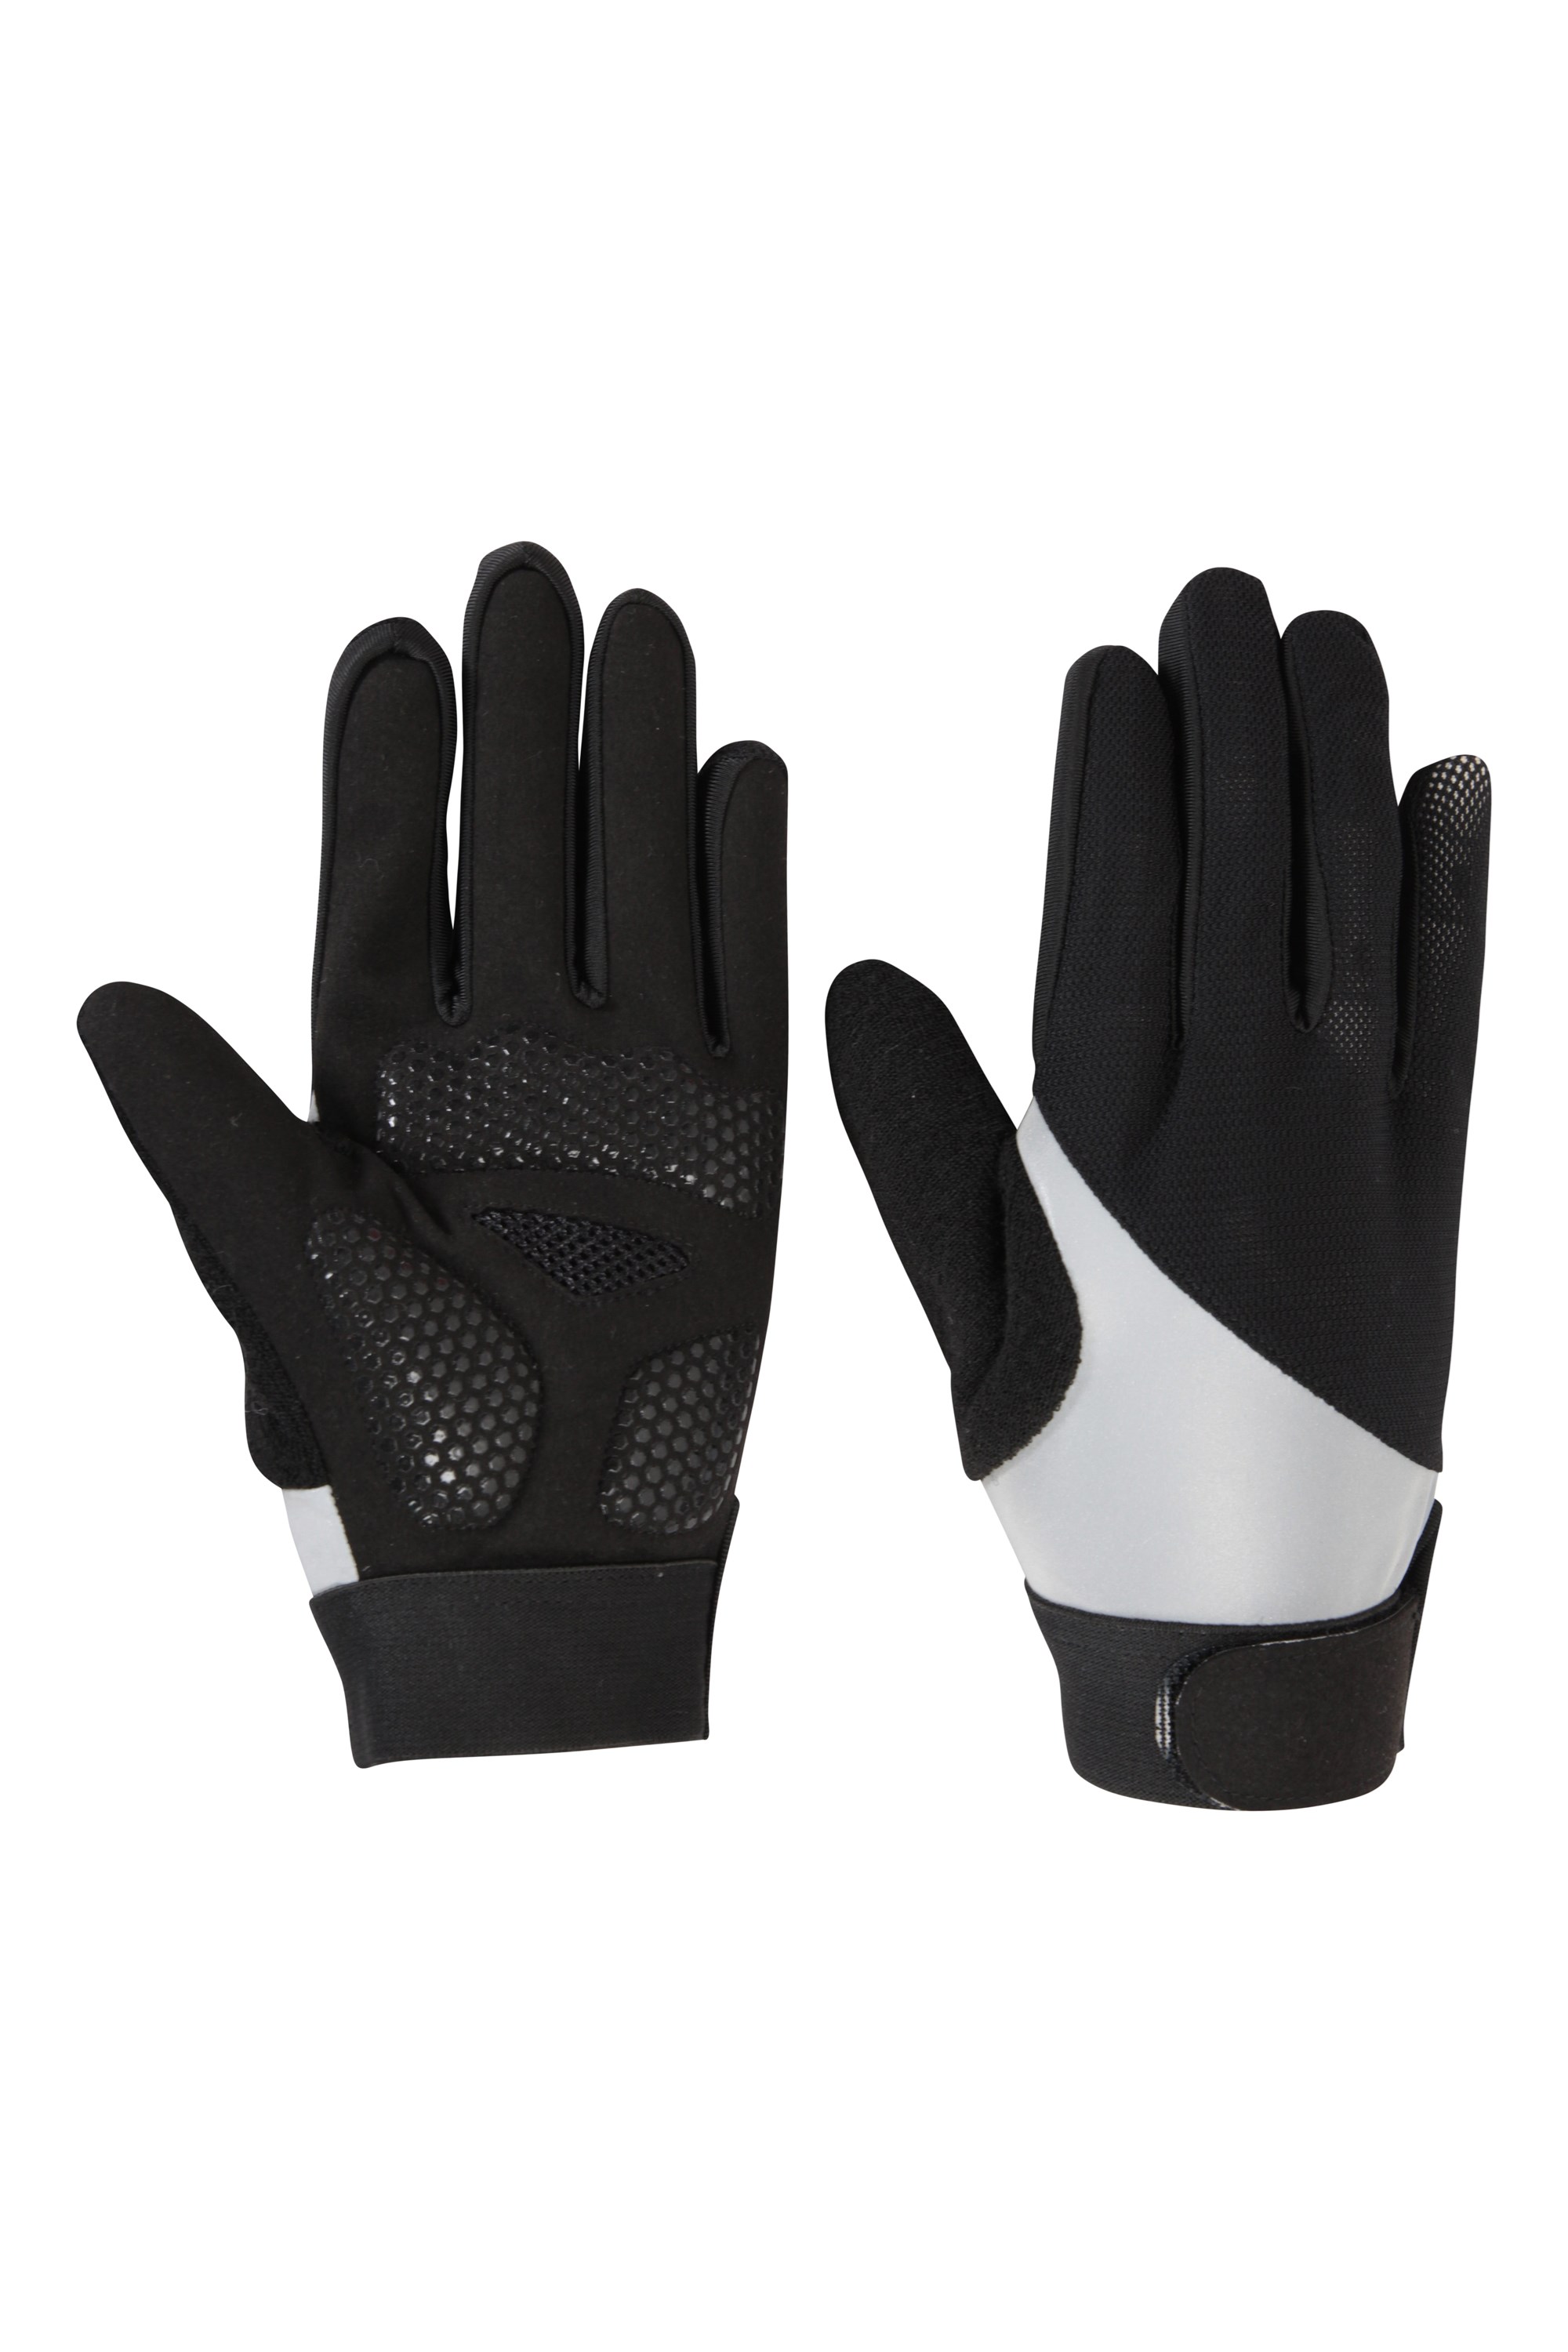 Ride Womens Padded Cycling Gloves - Black